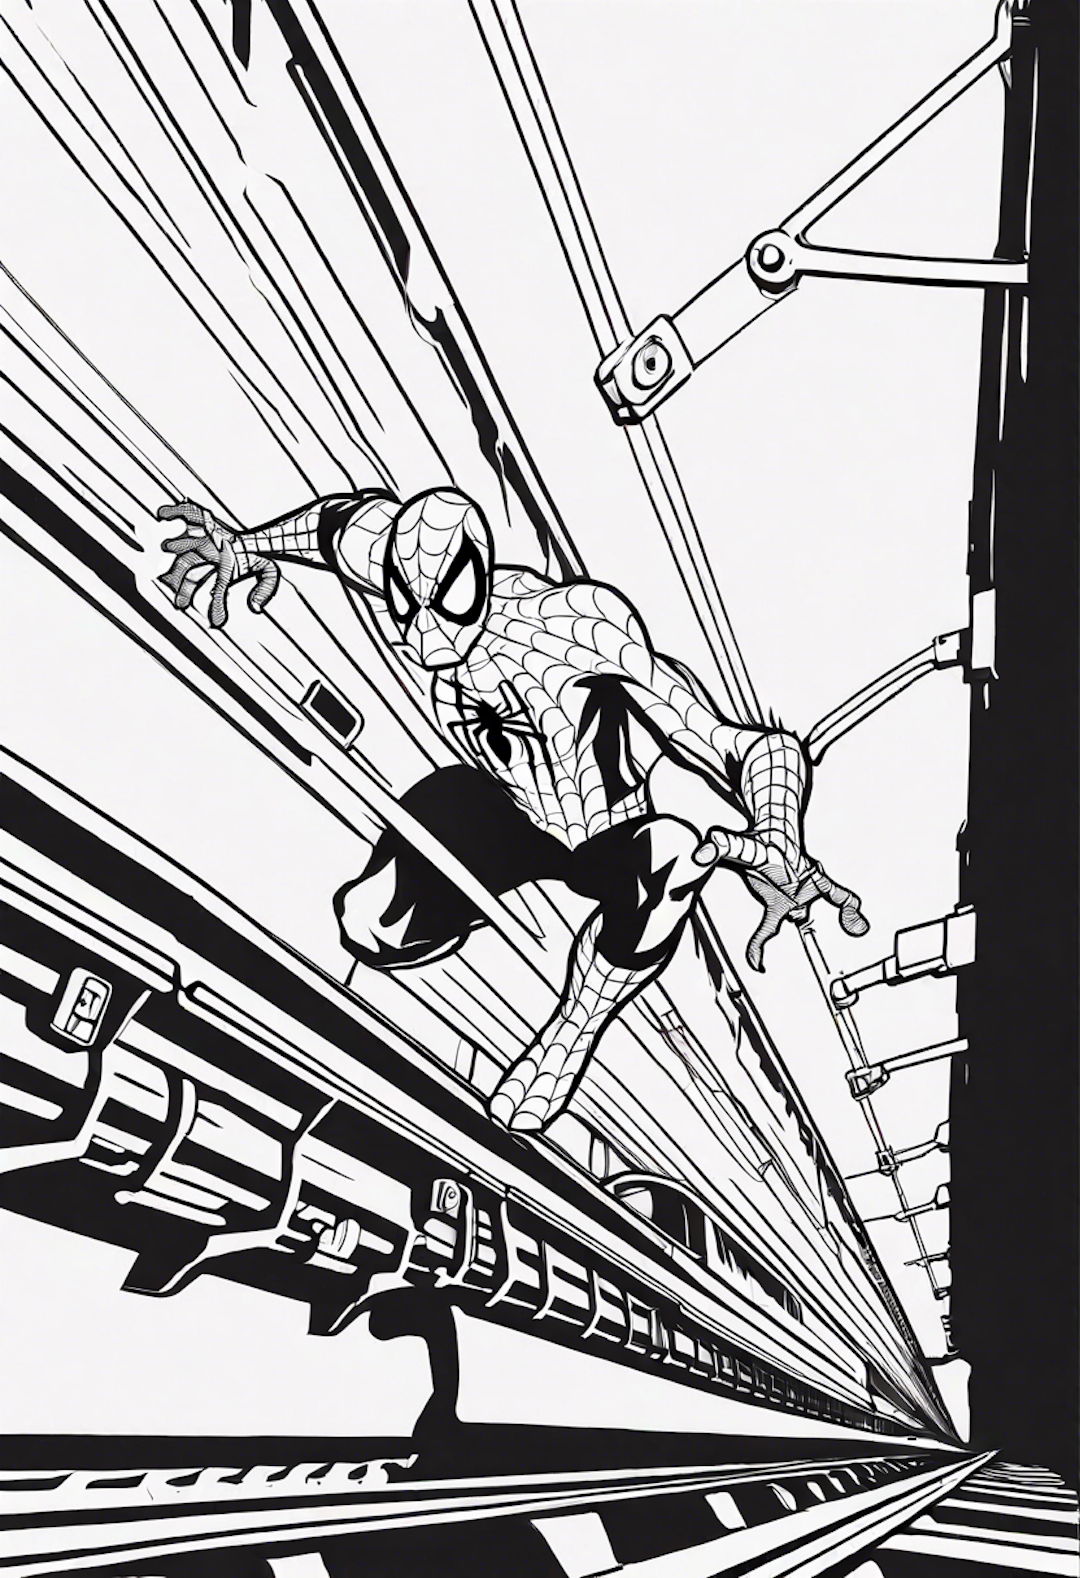 Spiderman Stopping A Train From Derailing